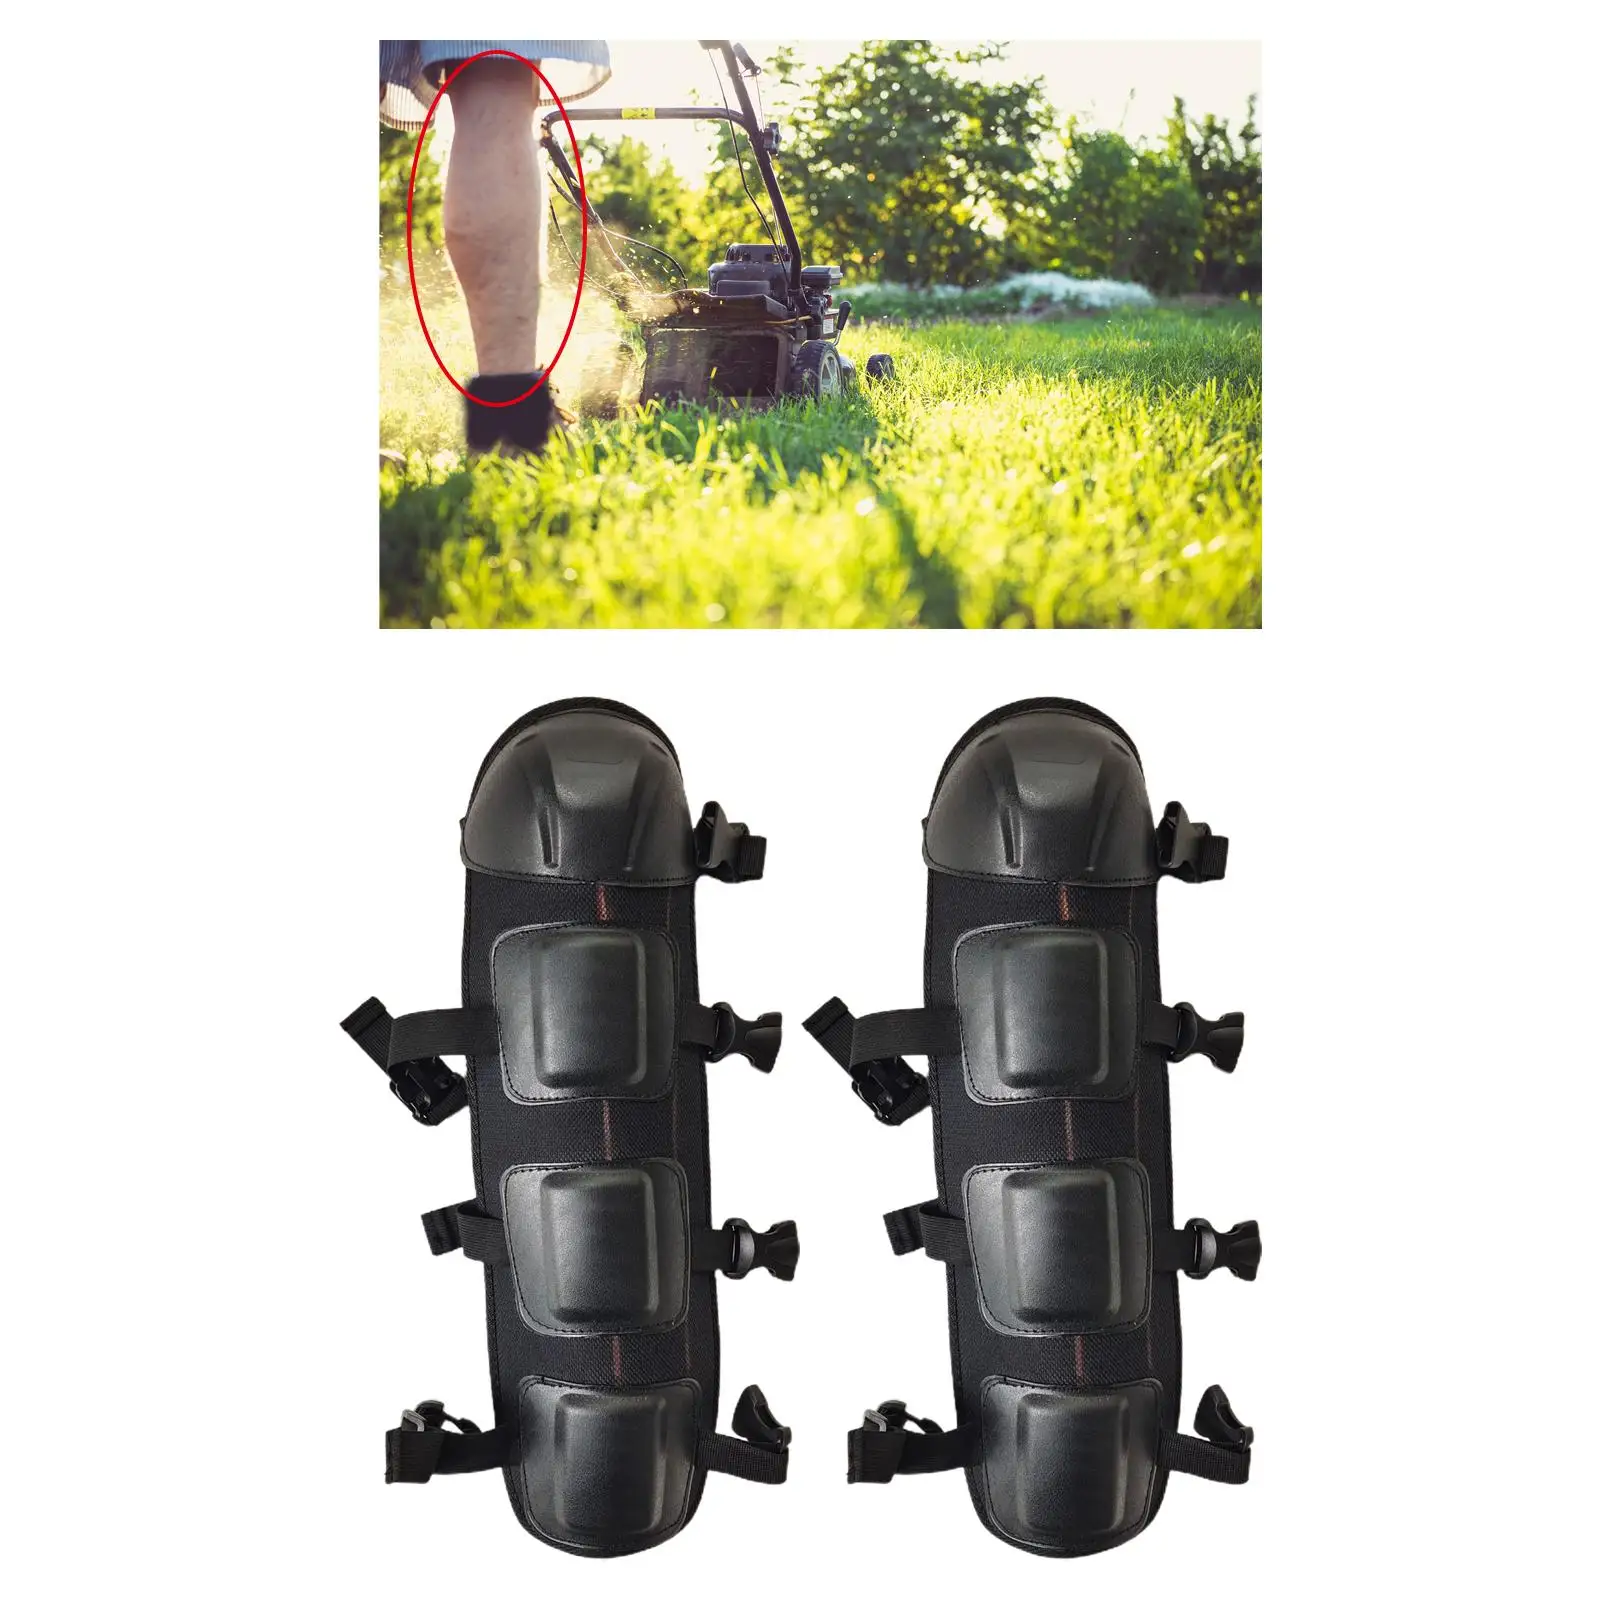 Knee Pads Adjustable Motorcycle Protective for Gardening Scooter Ski